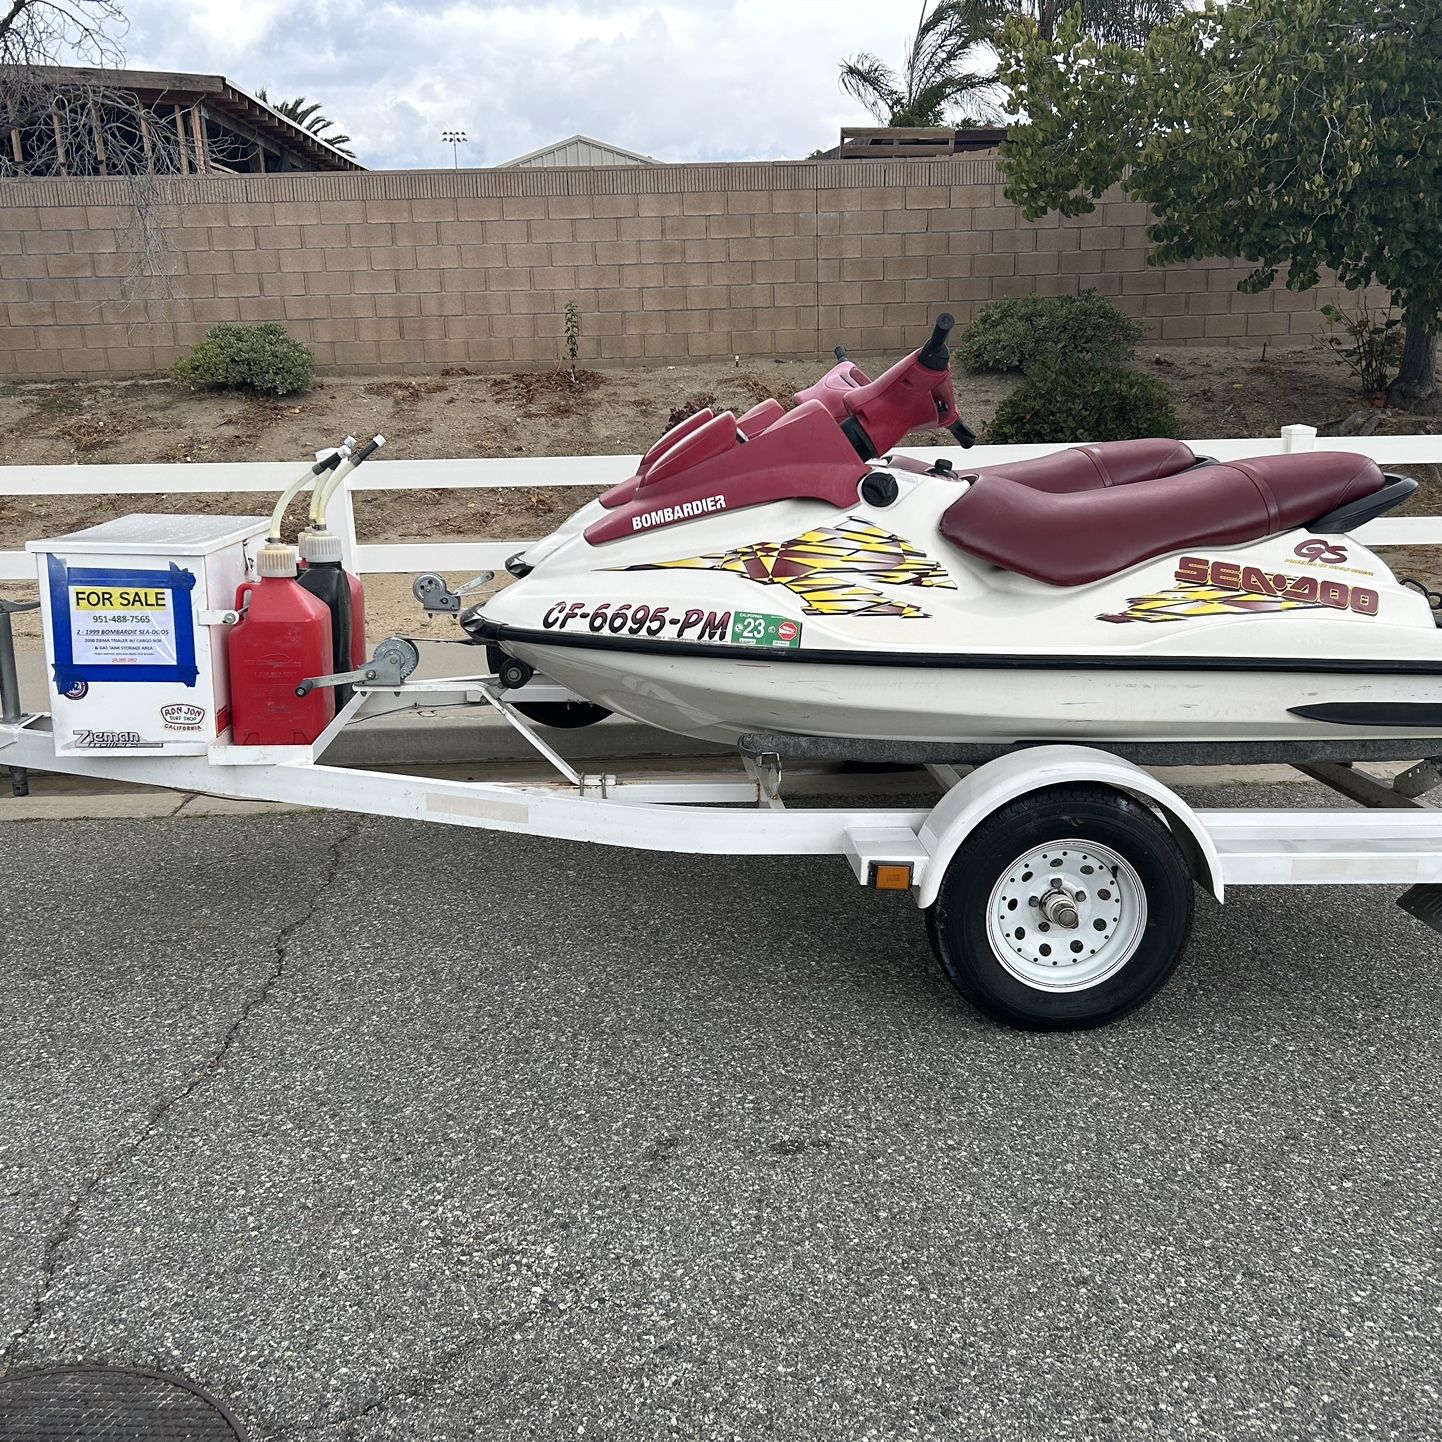 Jet Skis and trailer